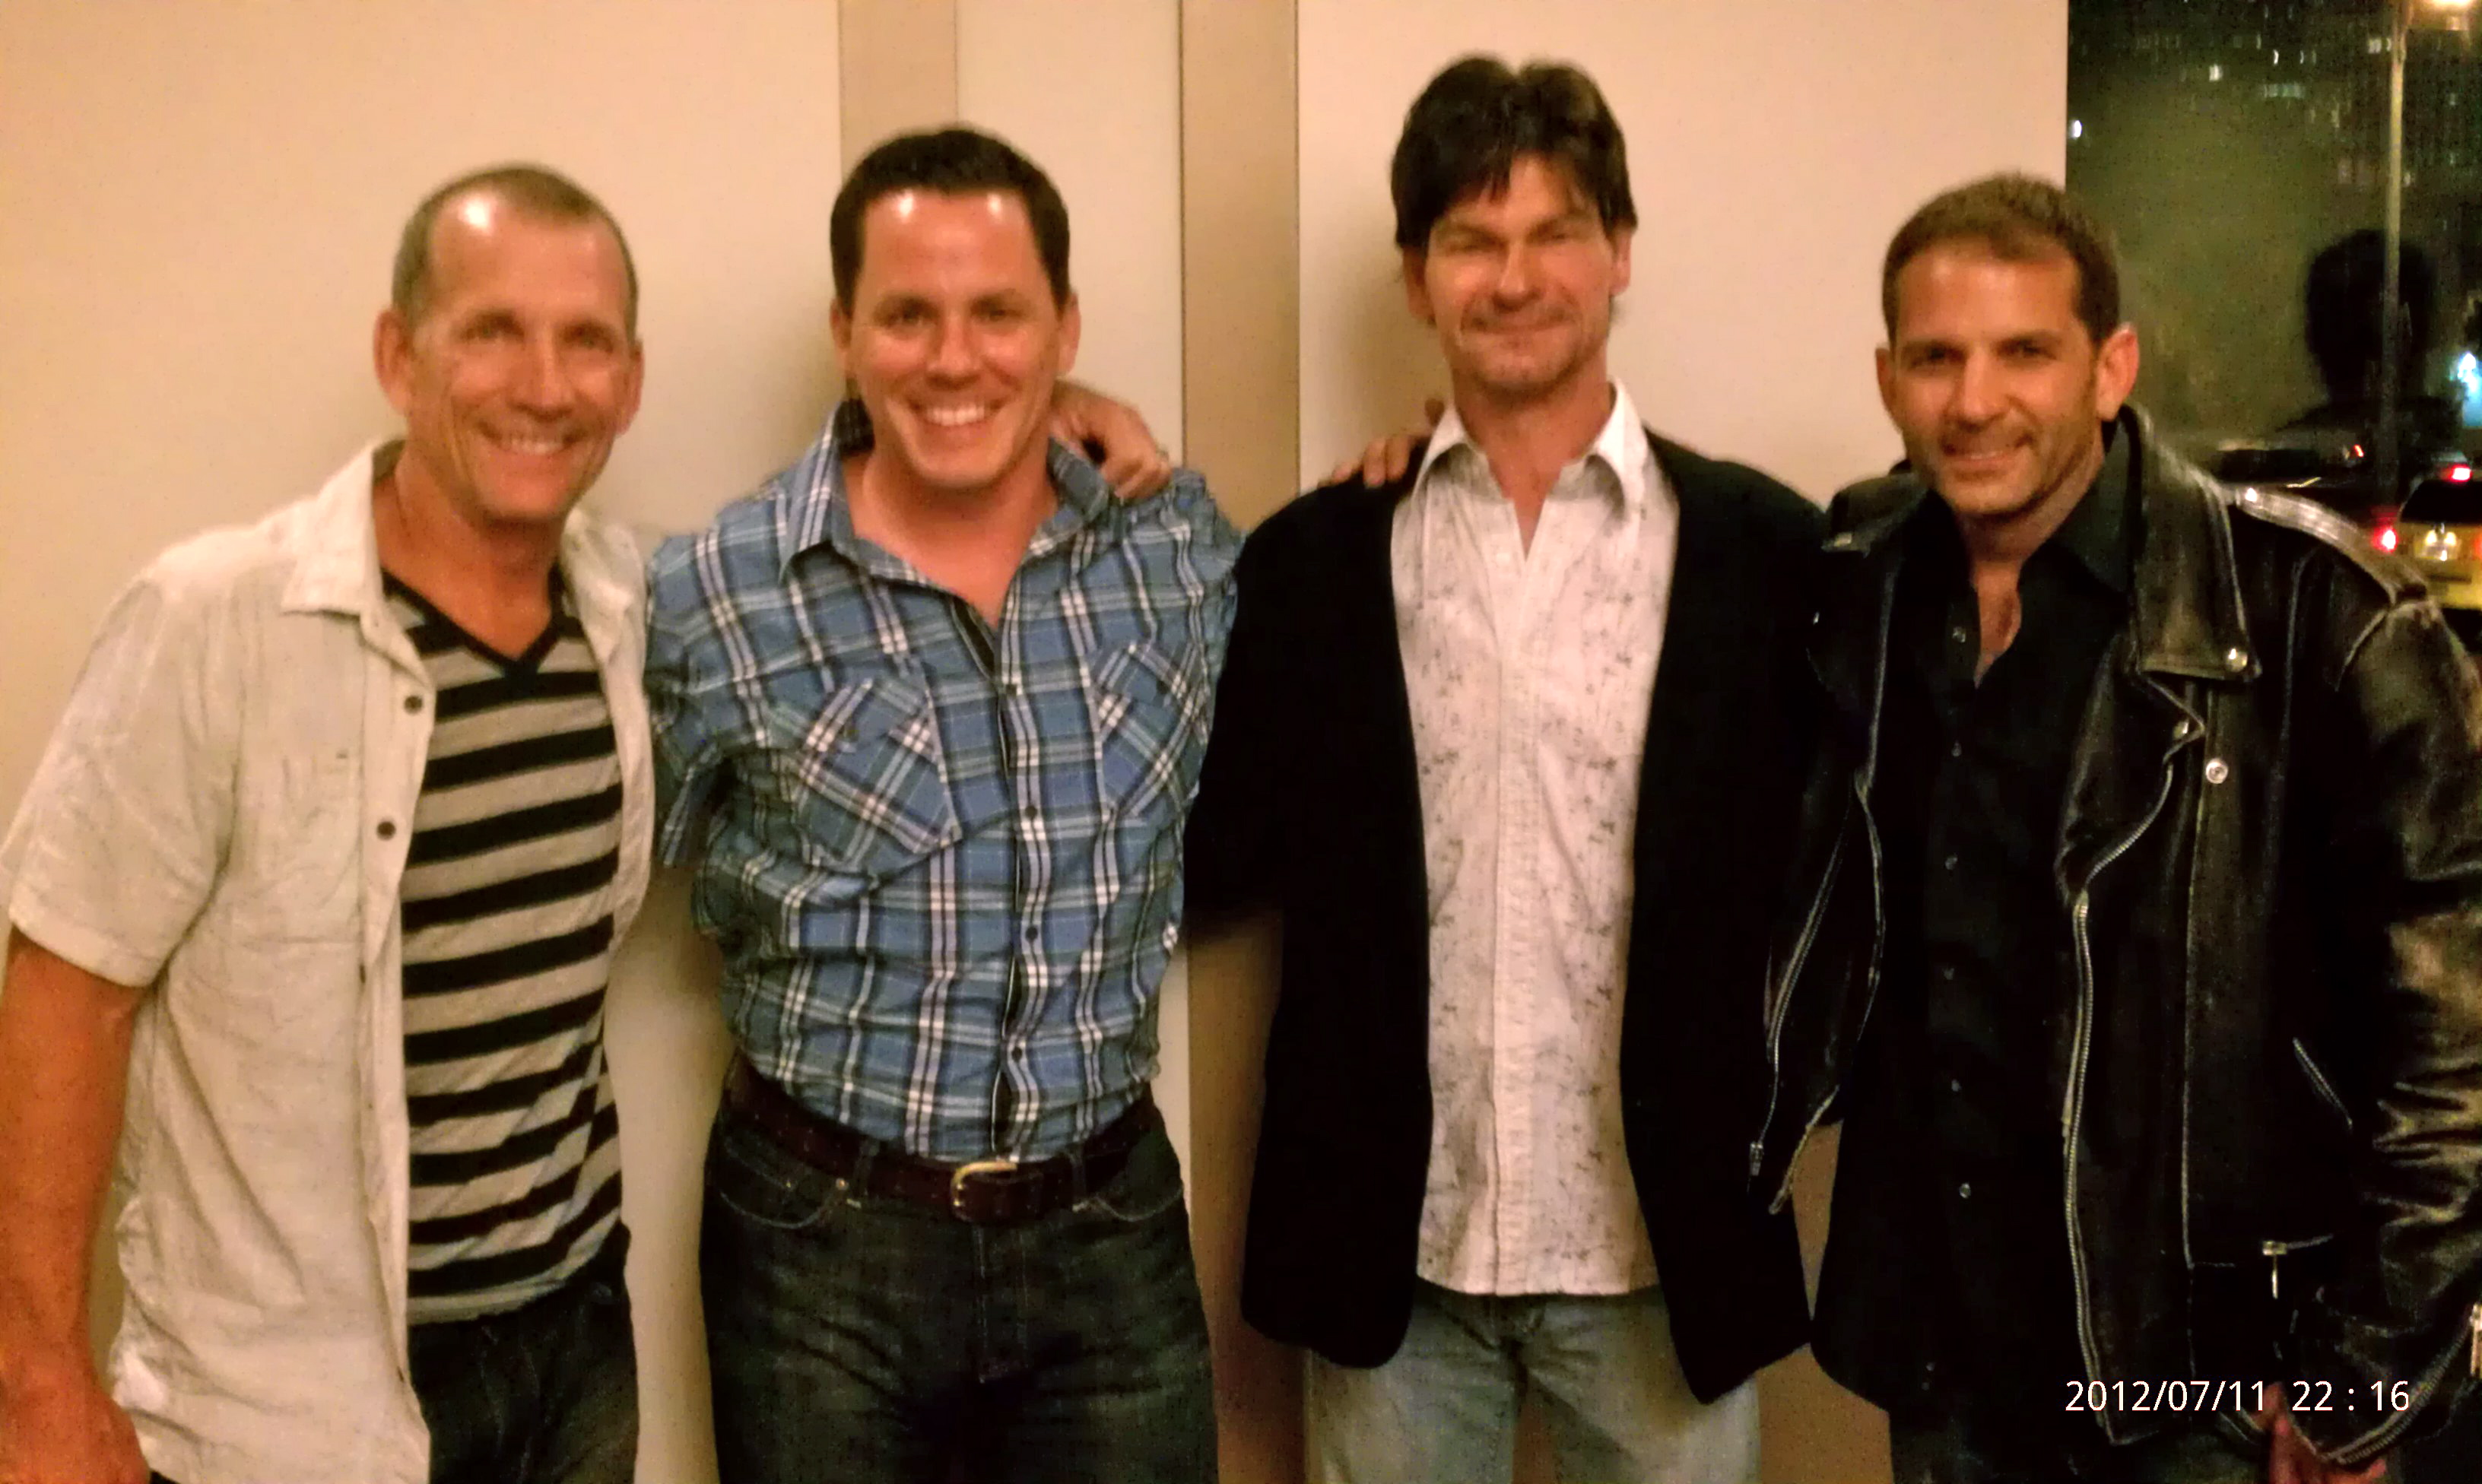 At the LA premier of Heathens and Thieves with Randy Mulkey, Christian Lyon, Don Swayze and Chris Devlin